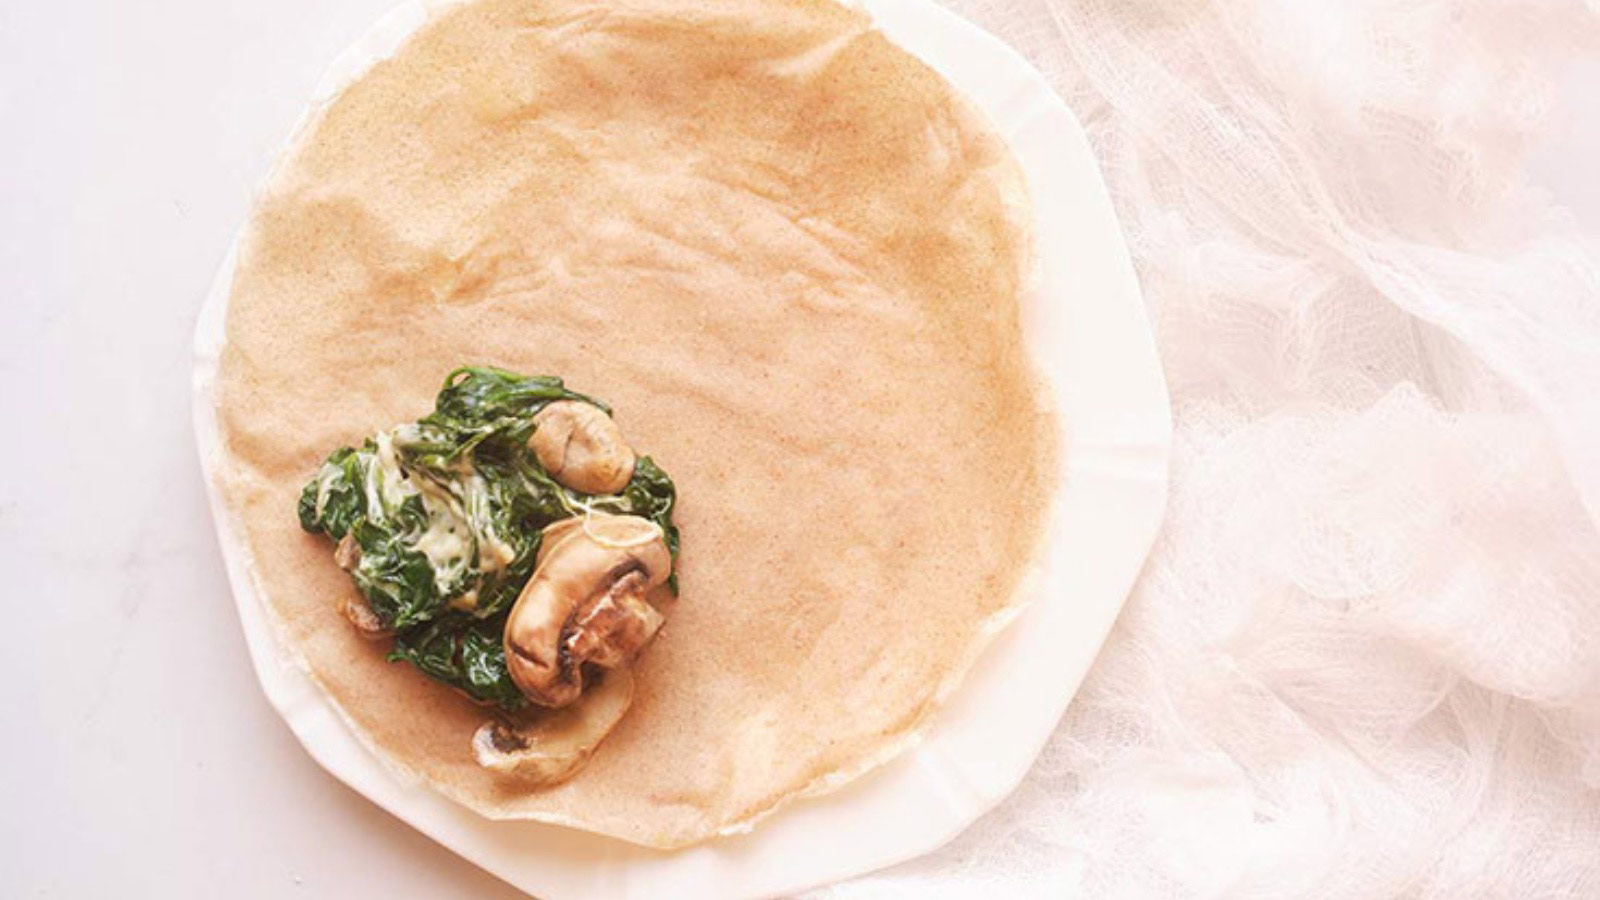 An overhead view of a crepe with savory mushroom and spinach filling.